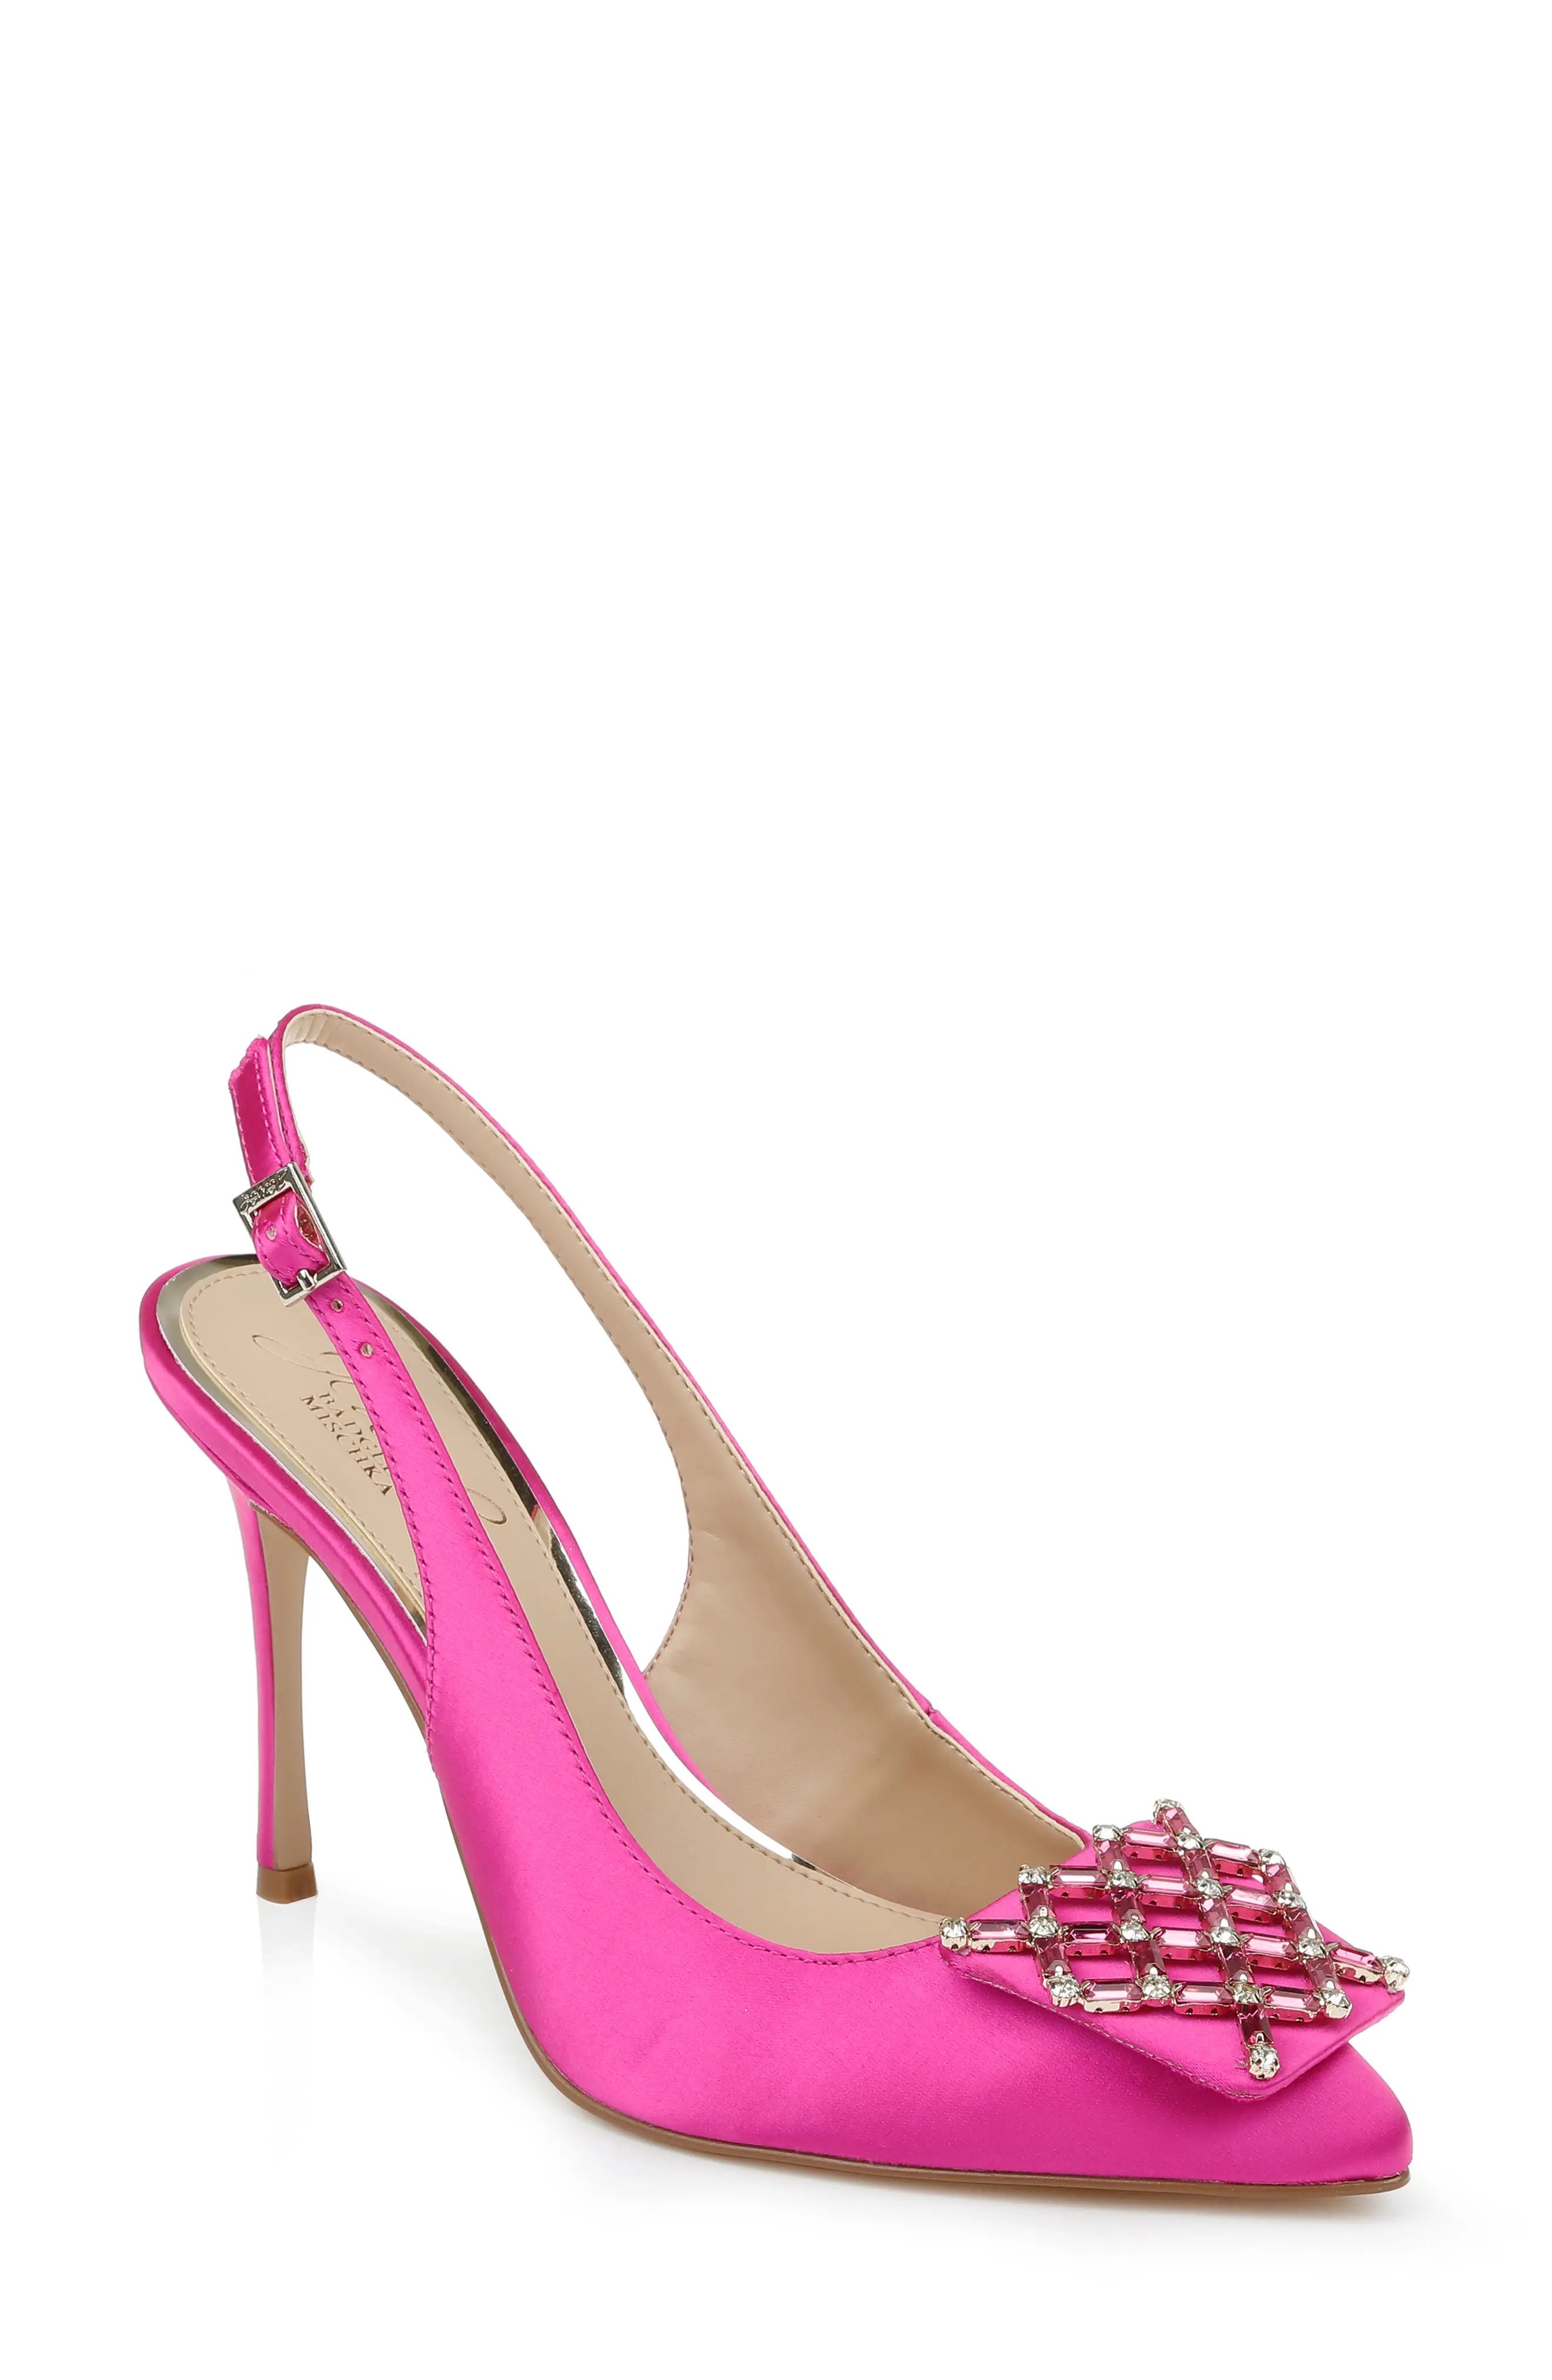 Jewel Badgley Mischka Lisbet Pointed Toe Slingback Pump in Neon Pink at Nordstrom, Size 6 | Nordstrom